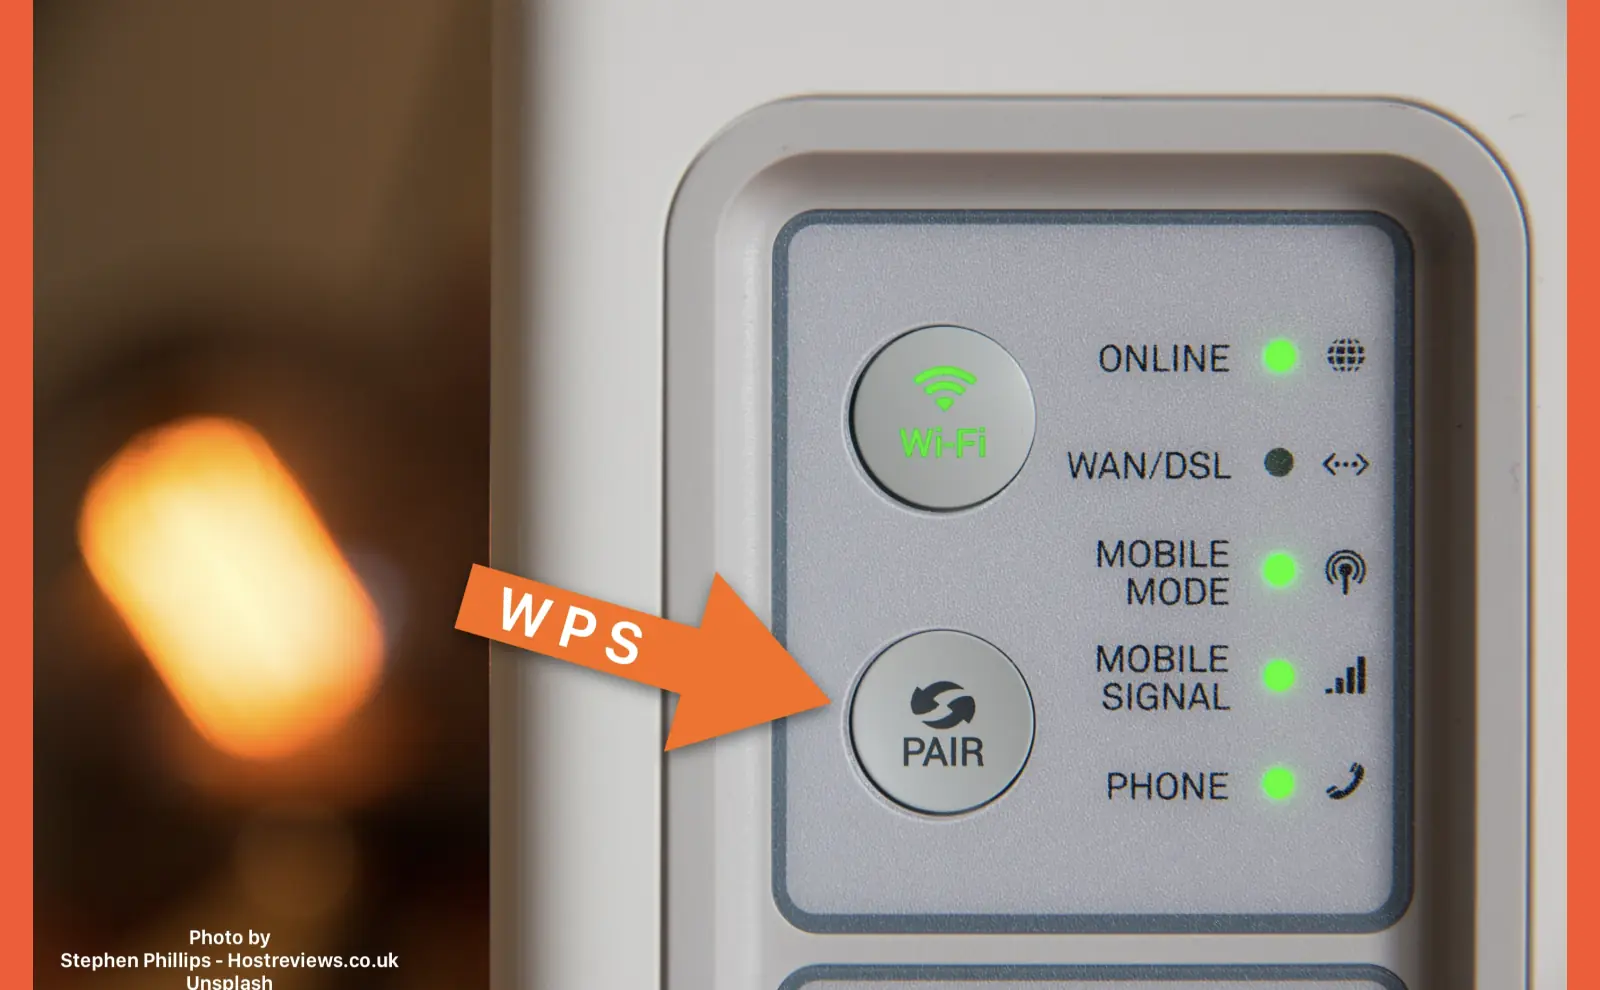 Arrow pointing to WPS button on a Wi-Fi router